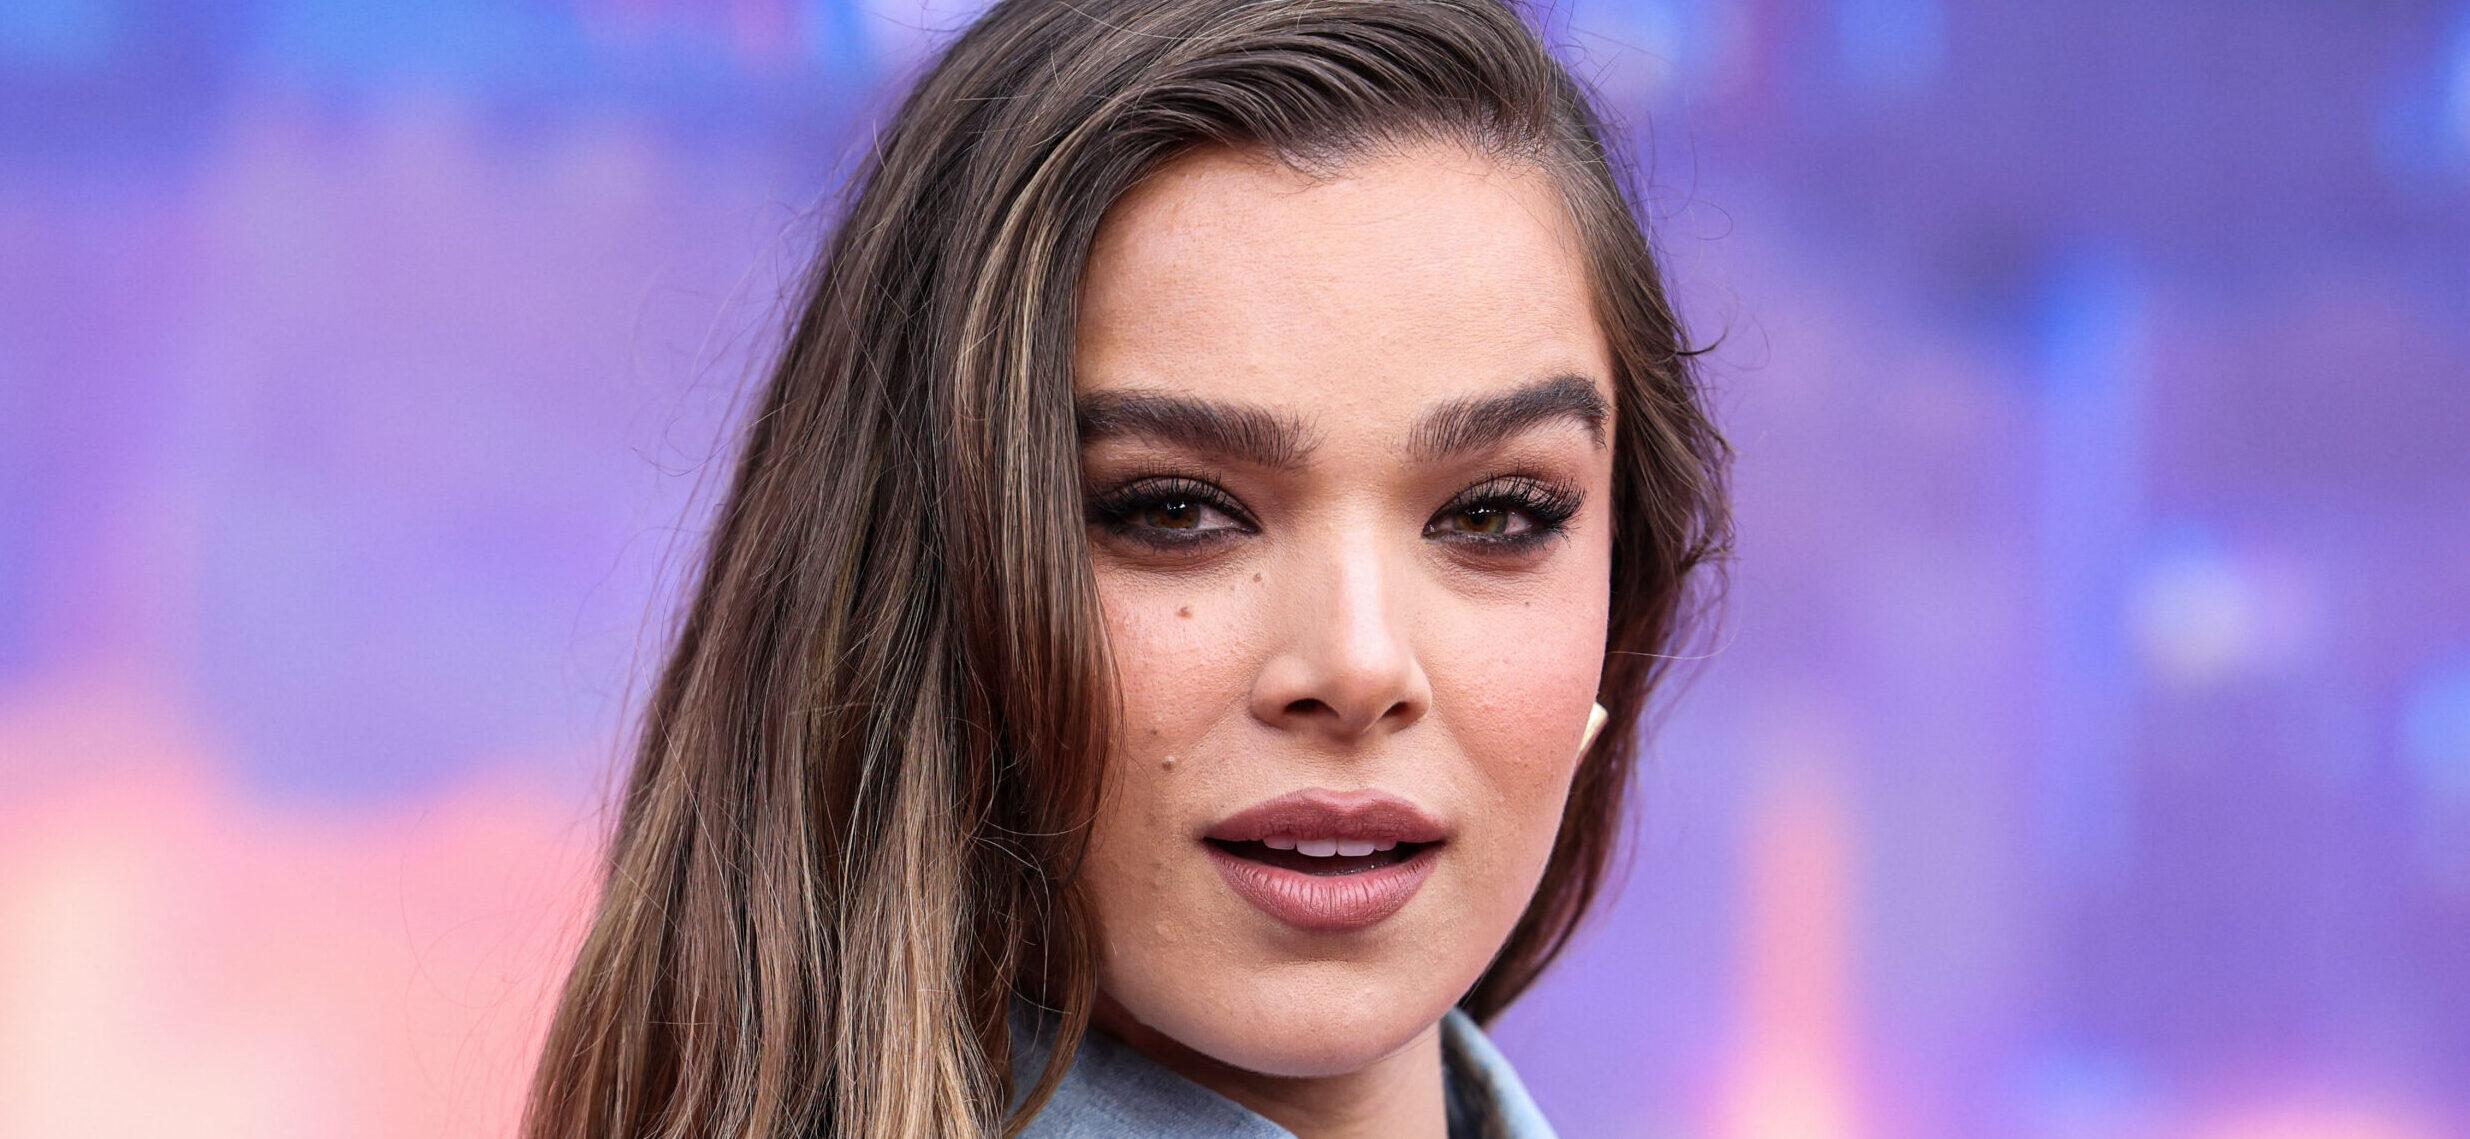 WESTWOOD, LOS ANGELES, CALIFORNIA, USA - MAY 30: World Premiere Of Sony Pictures Animation's 'Spider-Man: Across The Spider Verse' held at the Regency Village Theater on May 30, 2023 in Westwood, Los Angeles, California, United States. 31 May 2023 Pictured: Hailee Steinfeld. Photo credit: Xavier Collin/Image Press Agency/MEGA TheMegaAgency.com +1 888 505 6342 (Mega Agency TagID: MEGA989027_021.jpg) [Photo via Mega Agency]